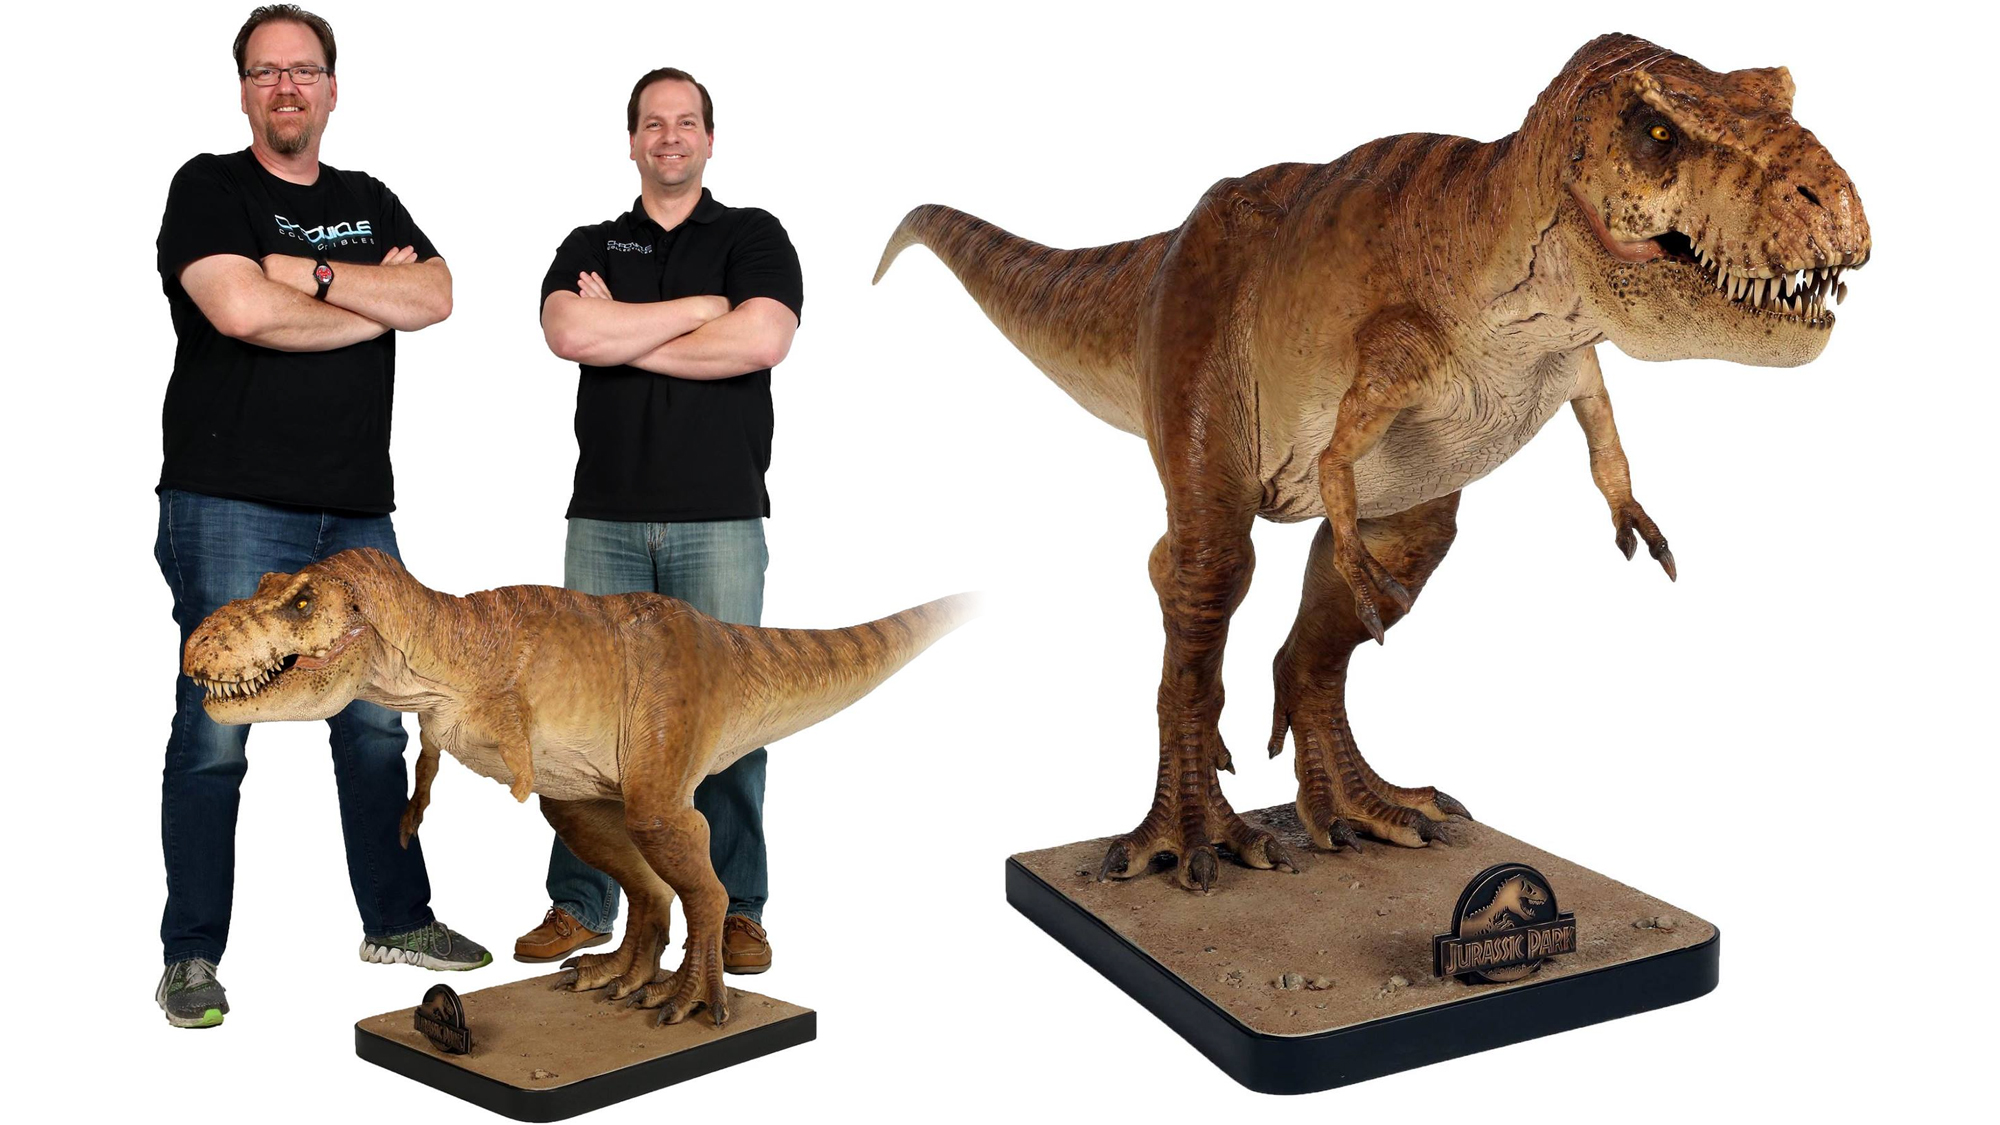 A Jurassic Park T-Rex the Size Of Your Torso, And More Of The Most Amazing Toys This Week